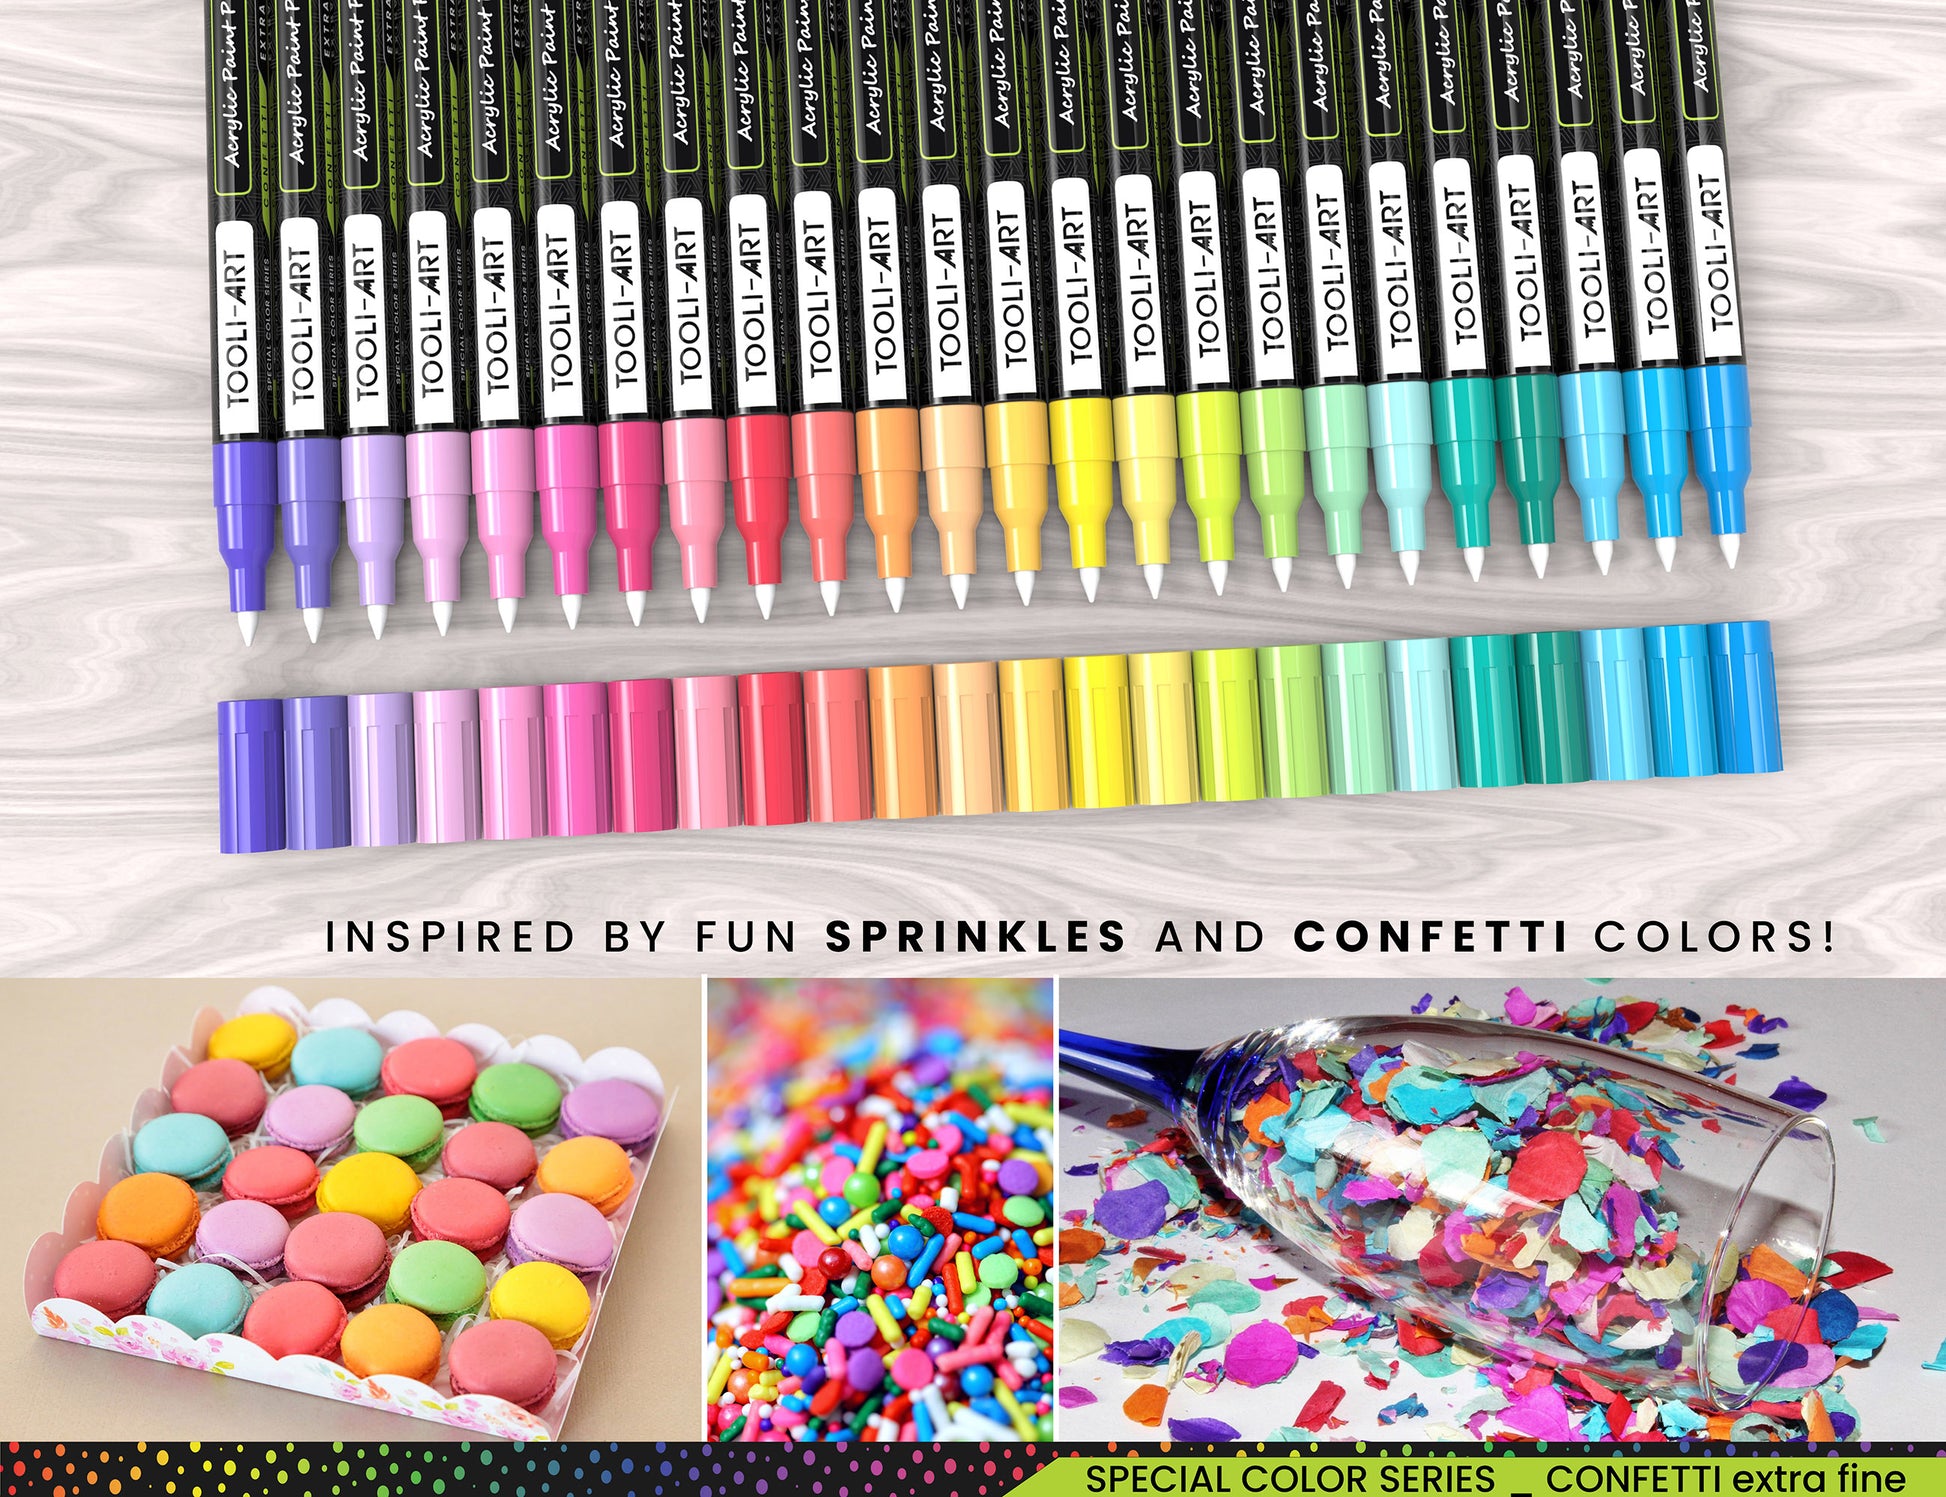 24 Confetti Colors Acrylic Paint Pens Markers Set 0.7mm Extra Fine Tip, Rock Painting, Glass, Mugs, Wood, Metal, Canvas, Ceramics, DIY Projects